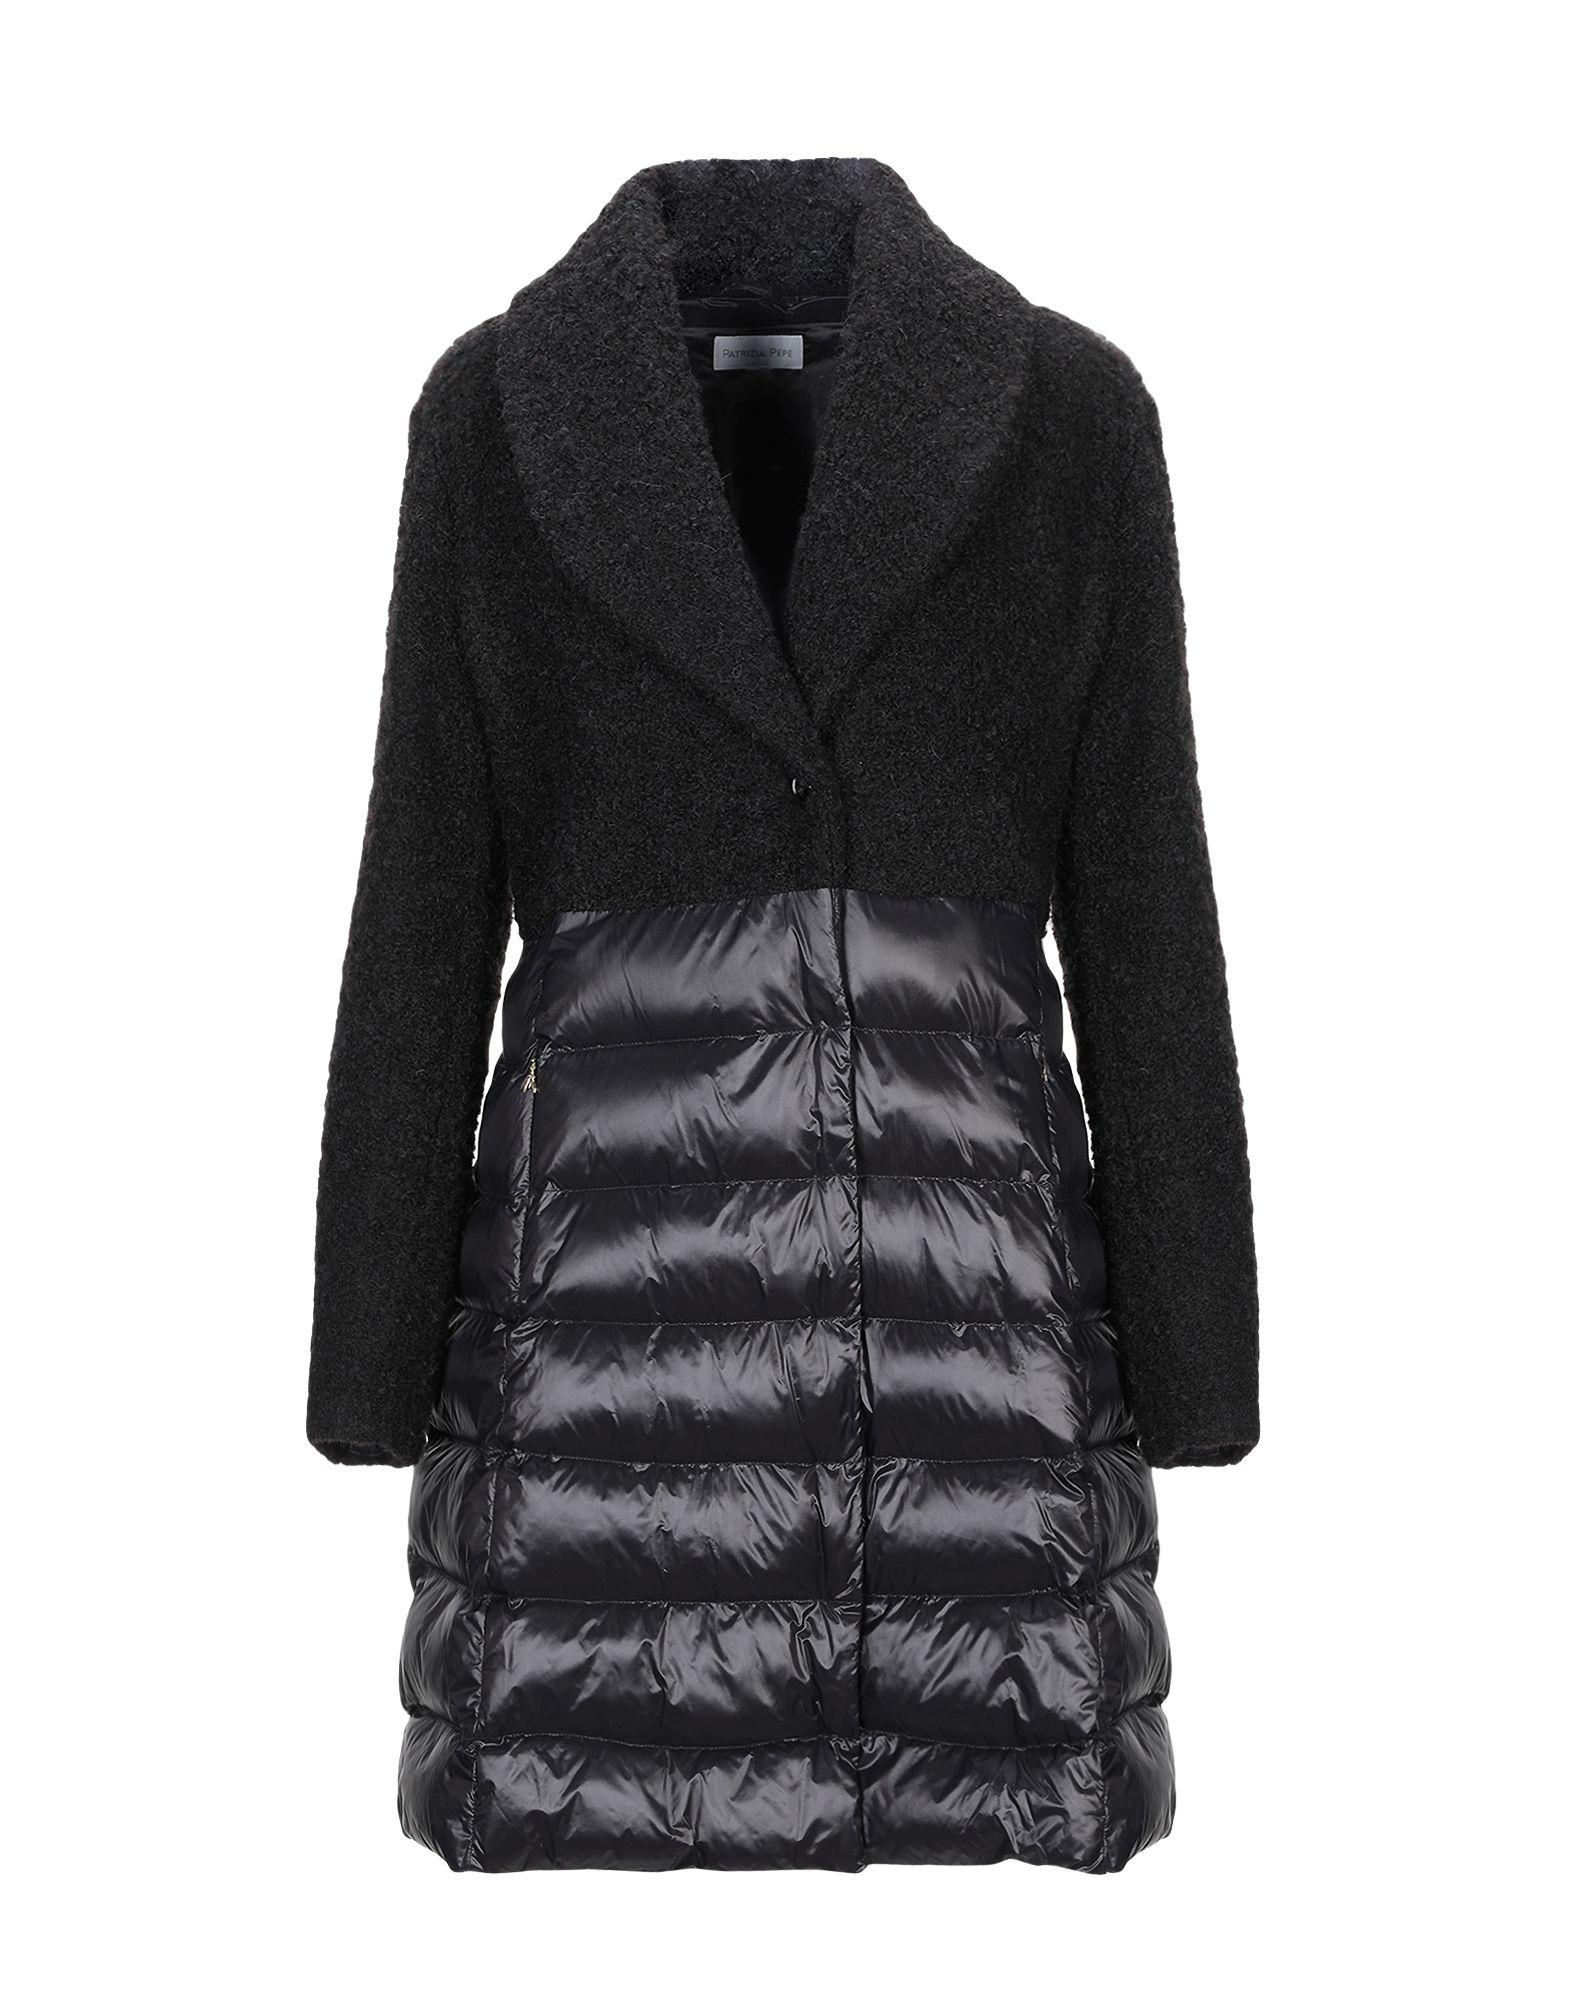 Patrizia Pepe Synthetic Down Jacket in Black - Lyst